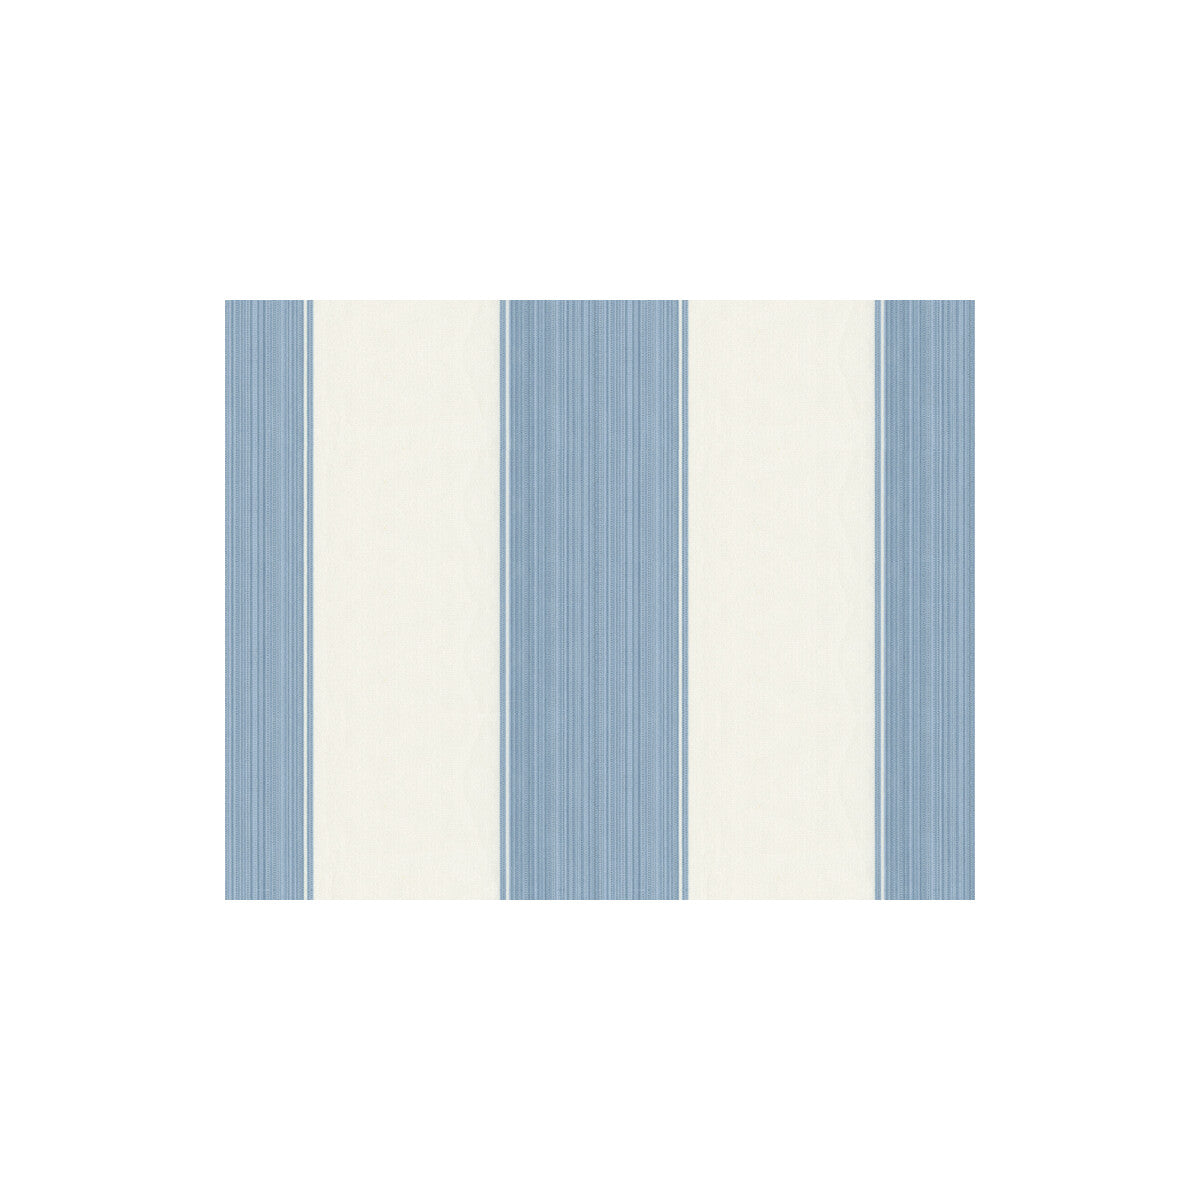 Granby fabric in lake color - pattern 32997.5.0 - by Kravet Basics in the Sarah Richardson Affinity collection